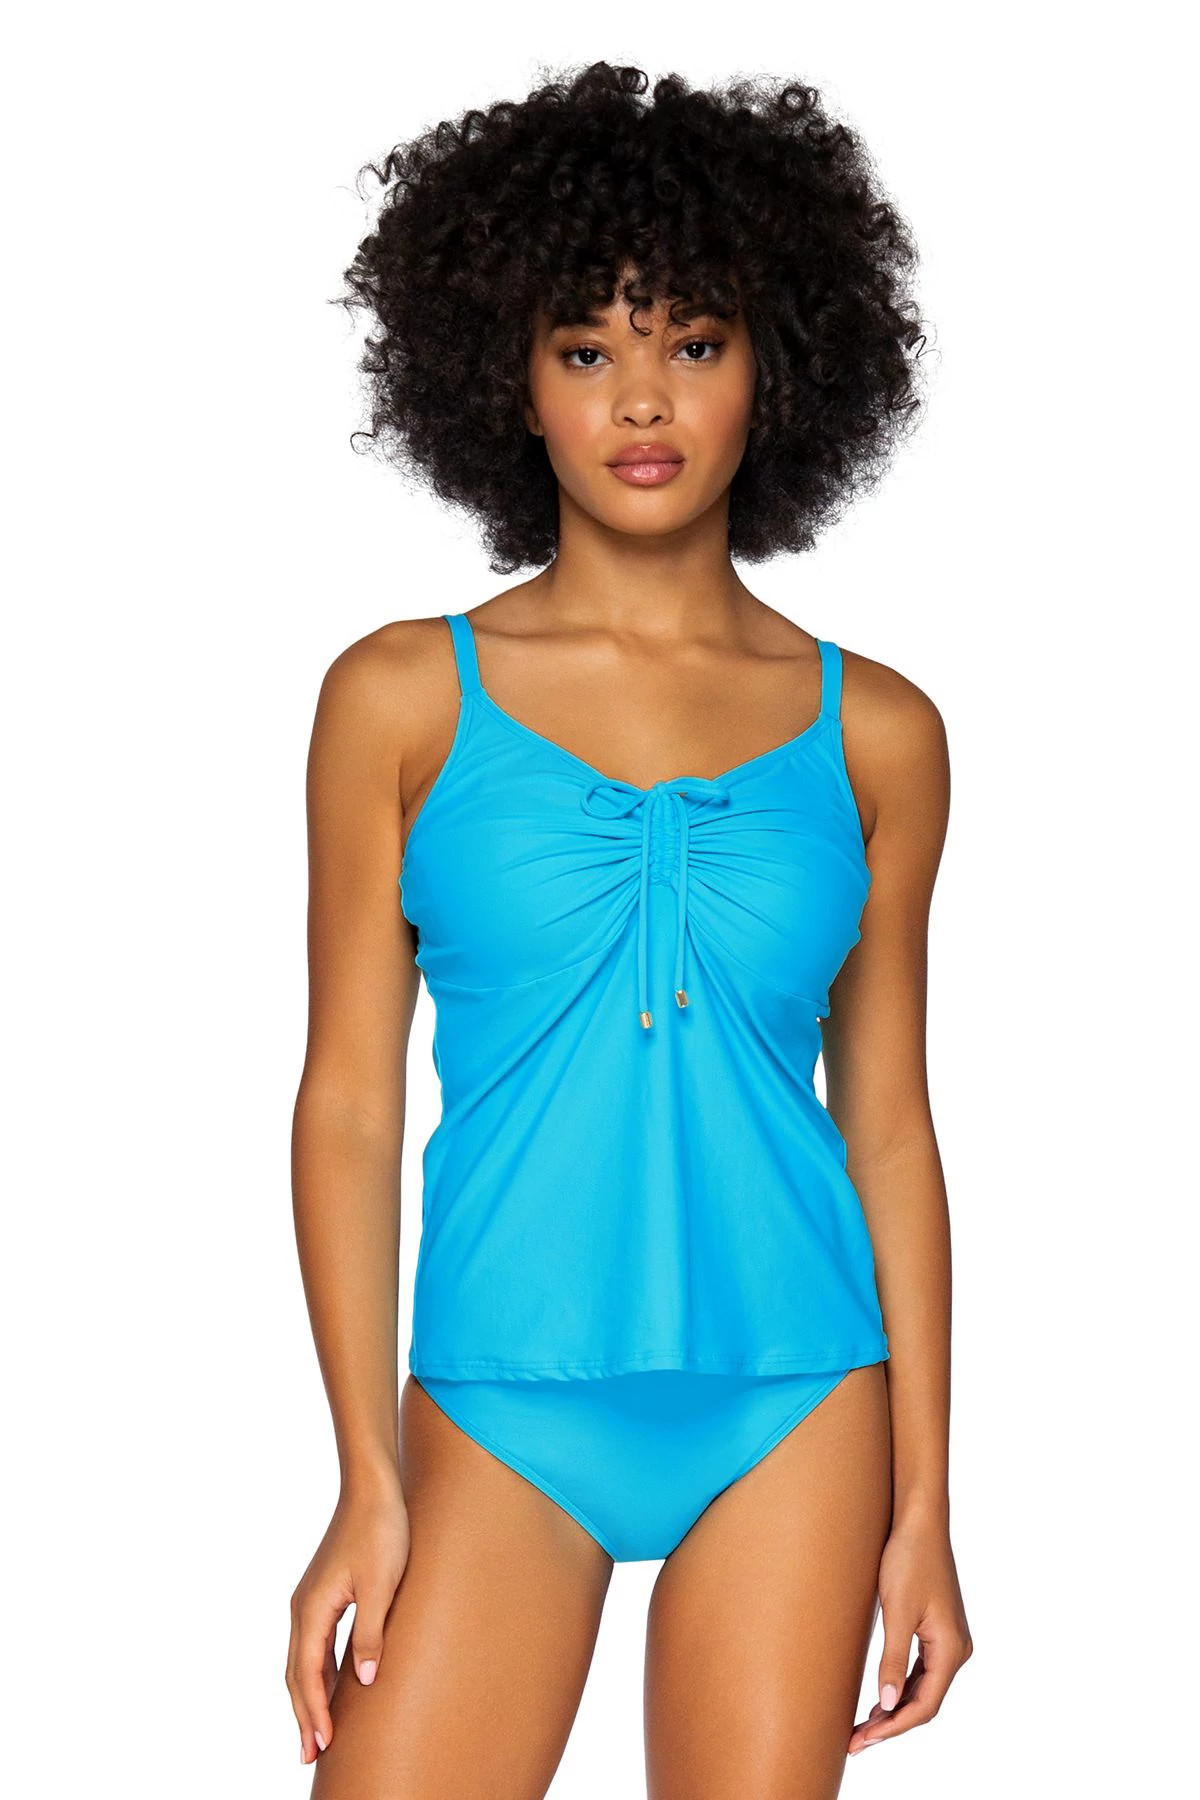 POOLSIDE BLUE Avery Over The Shoulder Tankini Top (D+ Cup) image number 1